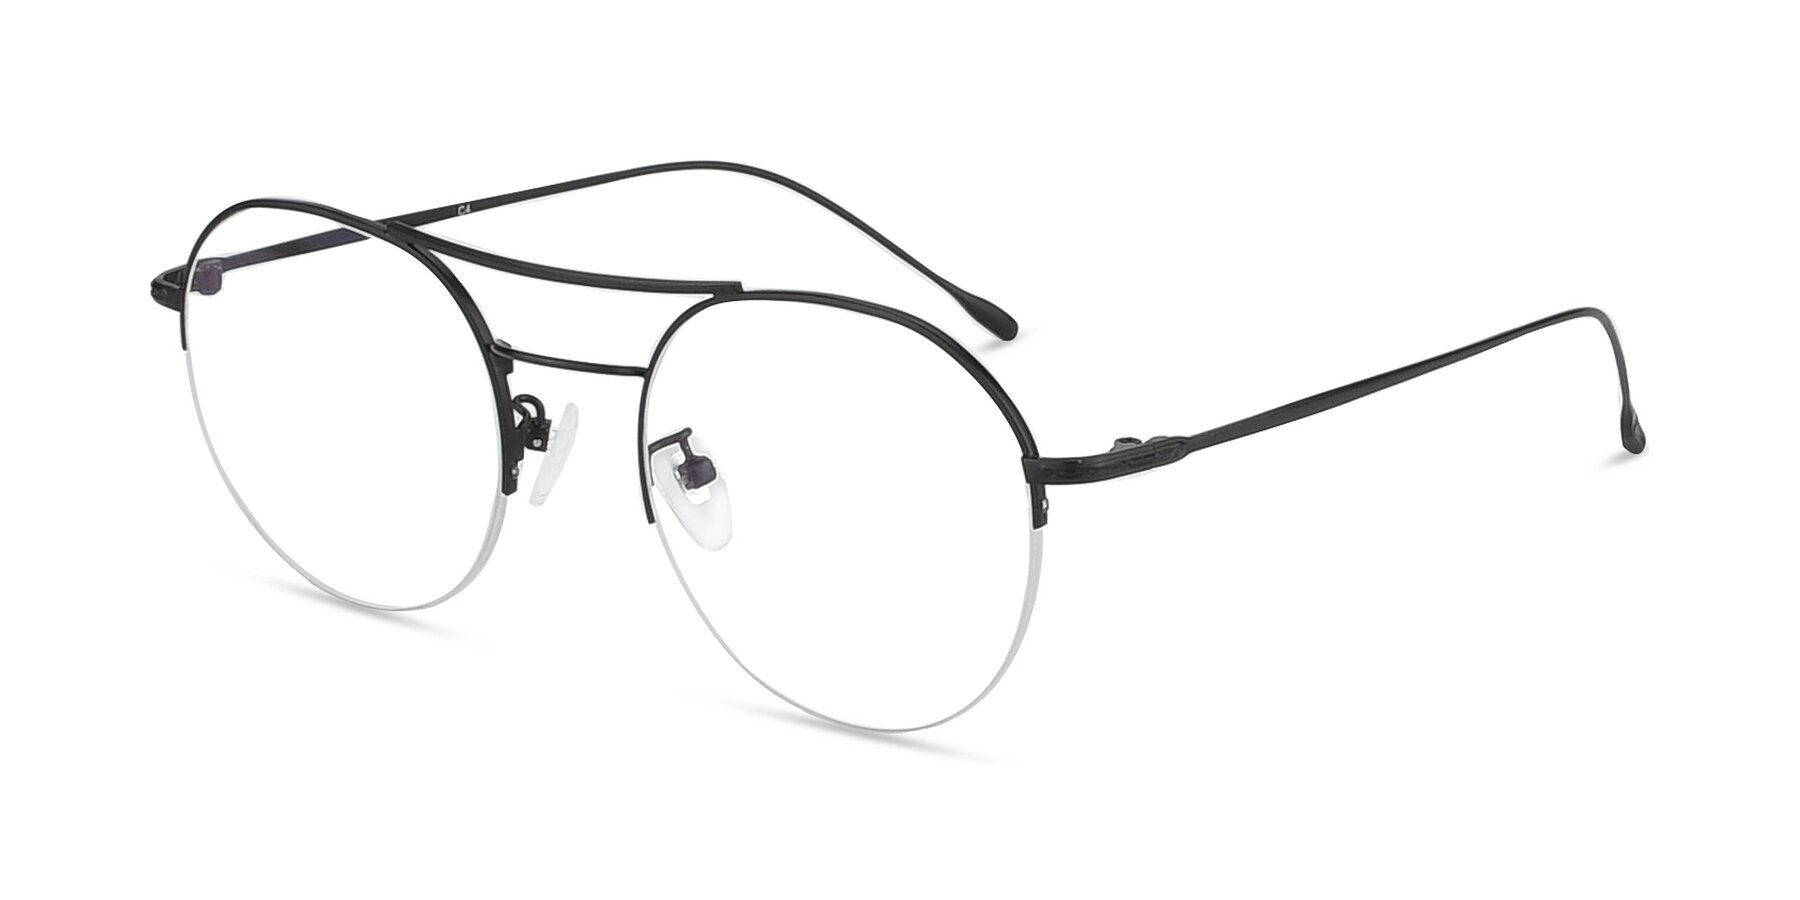 Angle of ST105 in Black with Clear Eyeglass Lenses